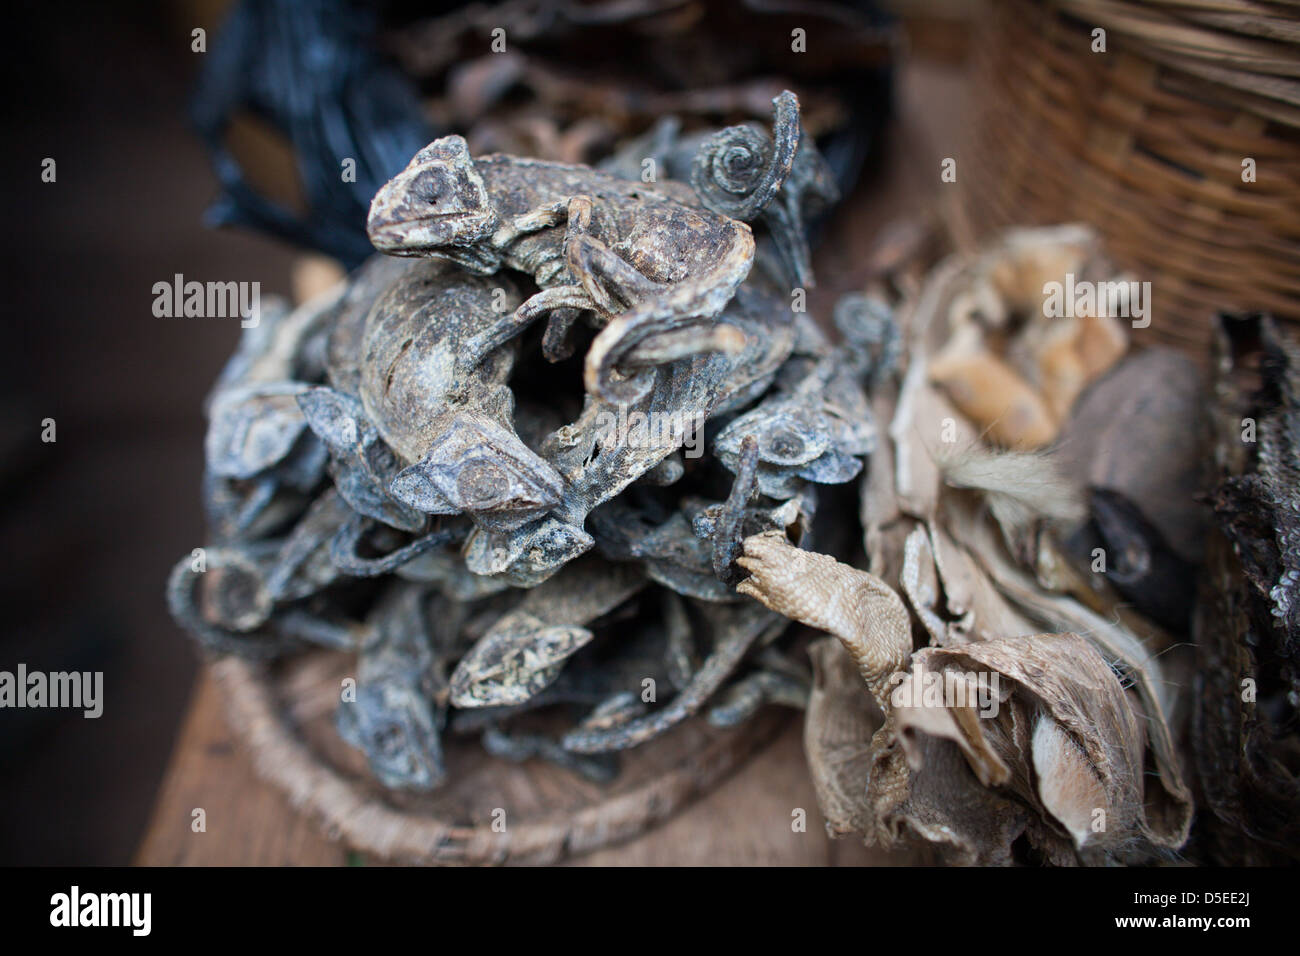 Dried chameleons used in traditional medicines, in a market in Accra, Ghana. Stock Photo